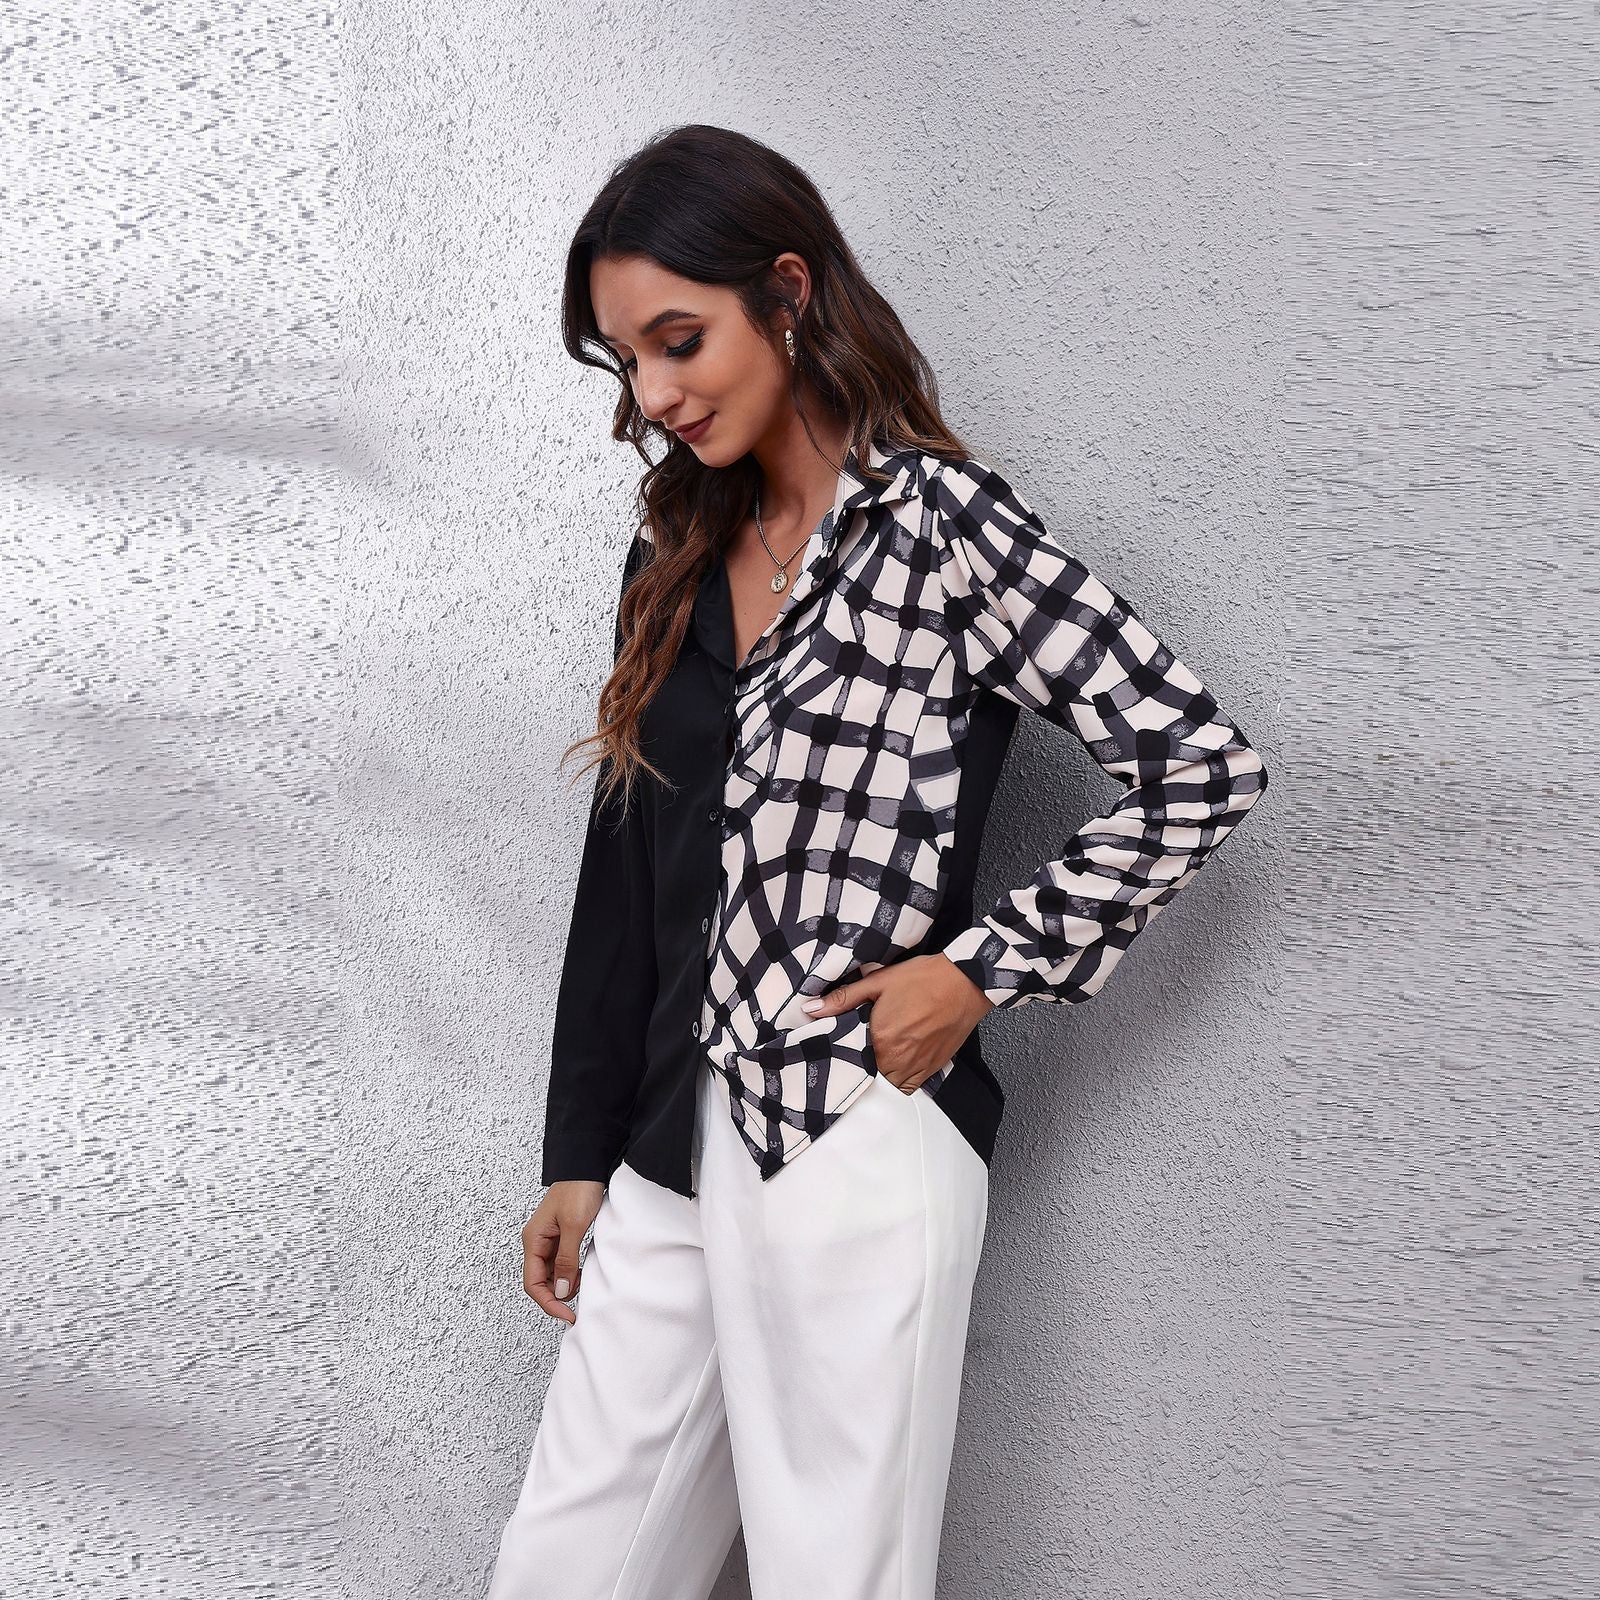 Plaid stitching puff sleeve long sleeve blouses tops